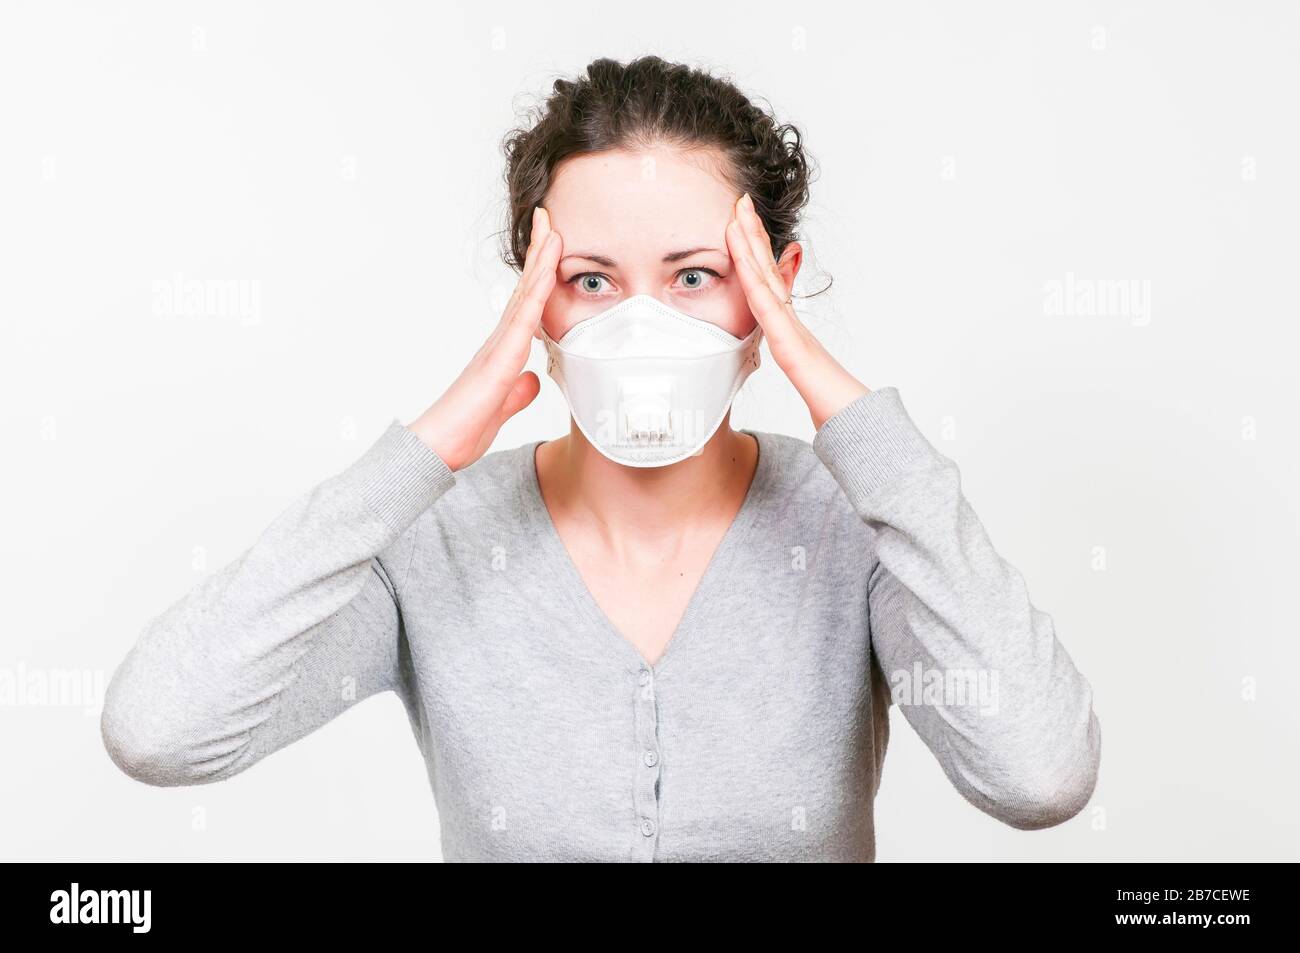 caucasian brunette woman in protective medical mask on face protection for spreading of disease virus SARS-CoV-2, Coronavirus, COVID-19. Stock Photo